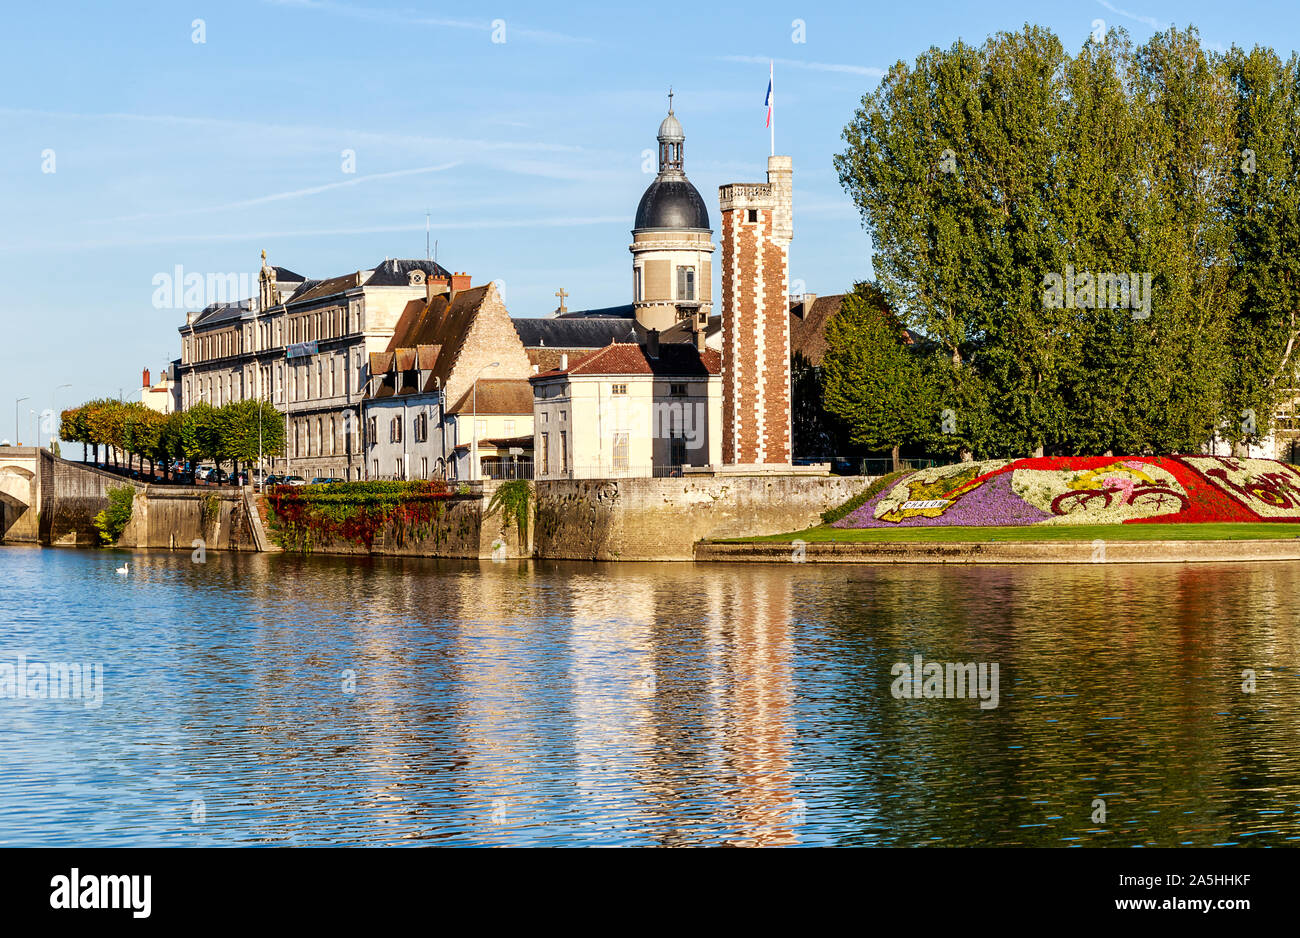 Chalon -sur –Saone, City of Art and History with the Tour du Doyenne from the 15th century in the historic center on the Saint-Laurent Island, France Stock Photo